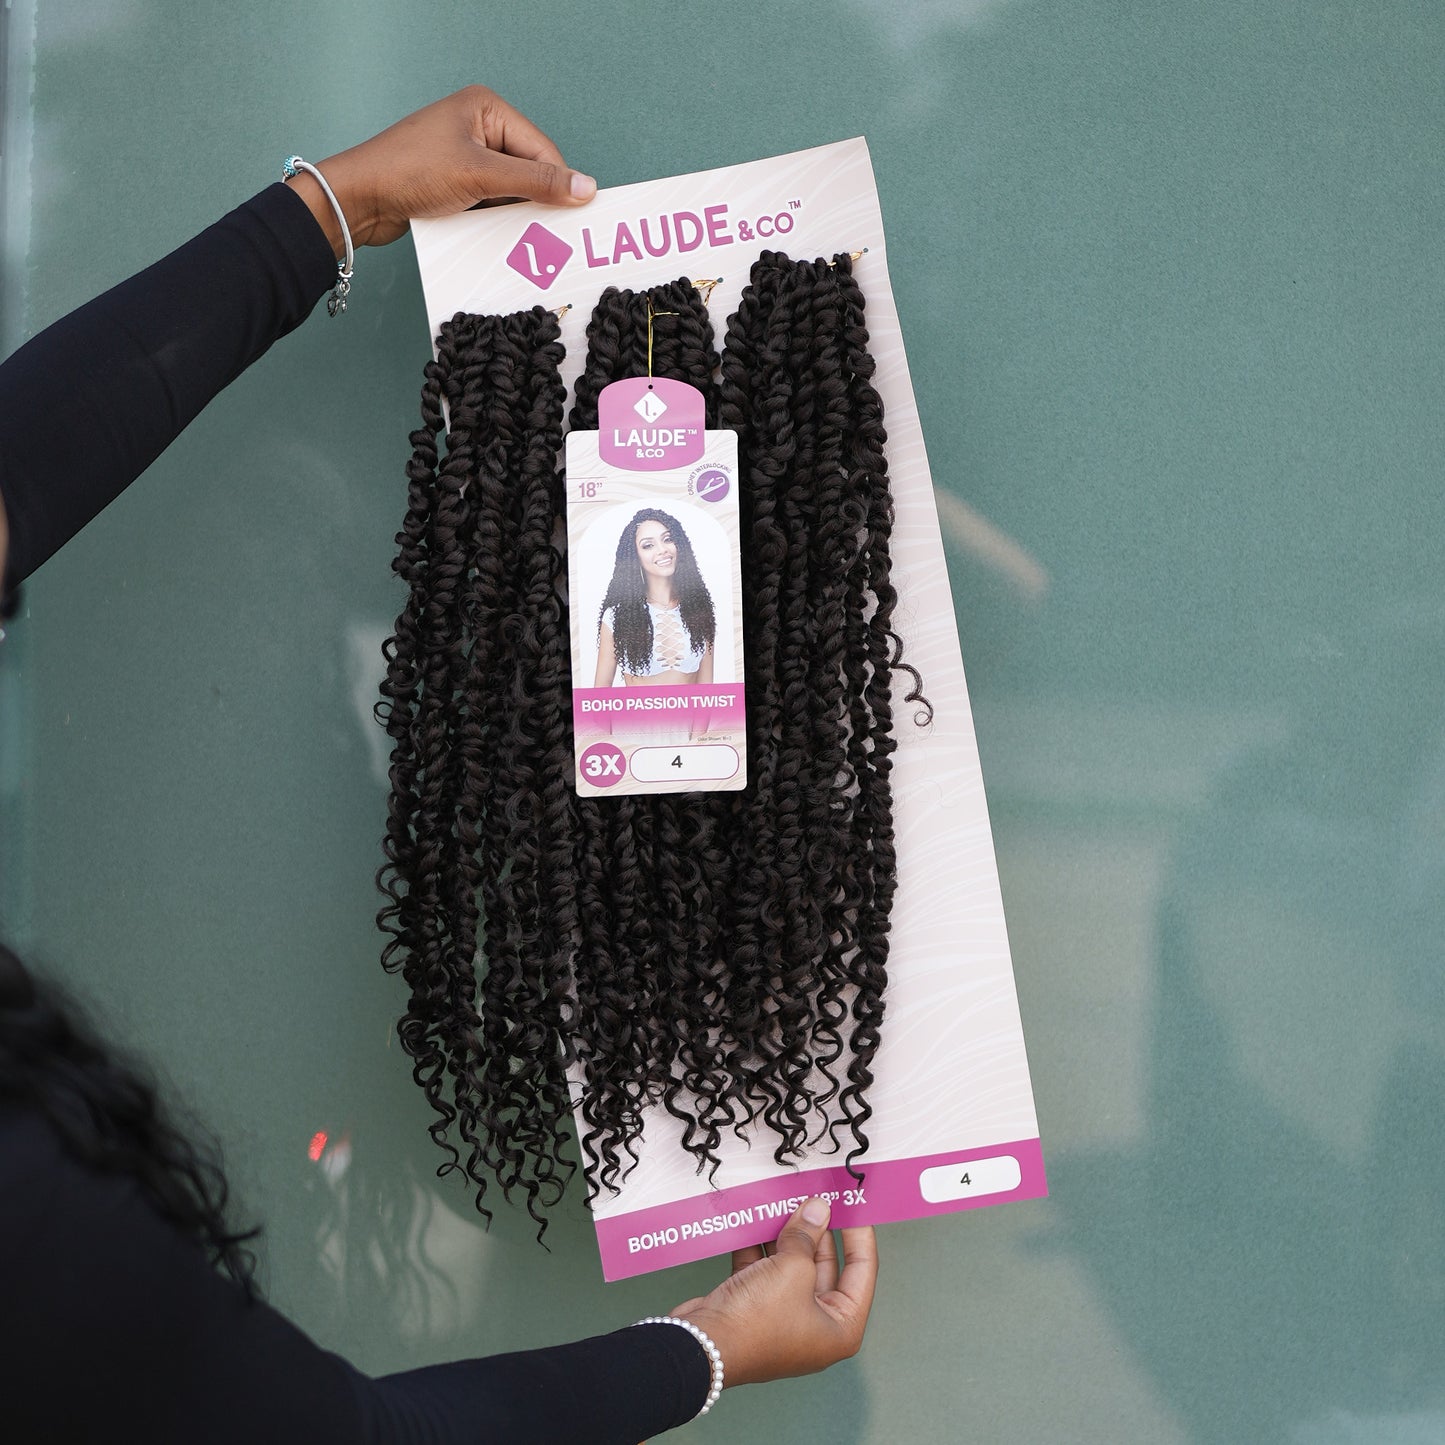 Laude Boho Style Passion Twists for Crocheting Hair, Easy to Use! [30 Strands in a Pack]